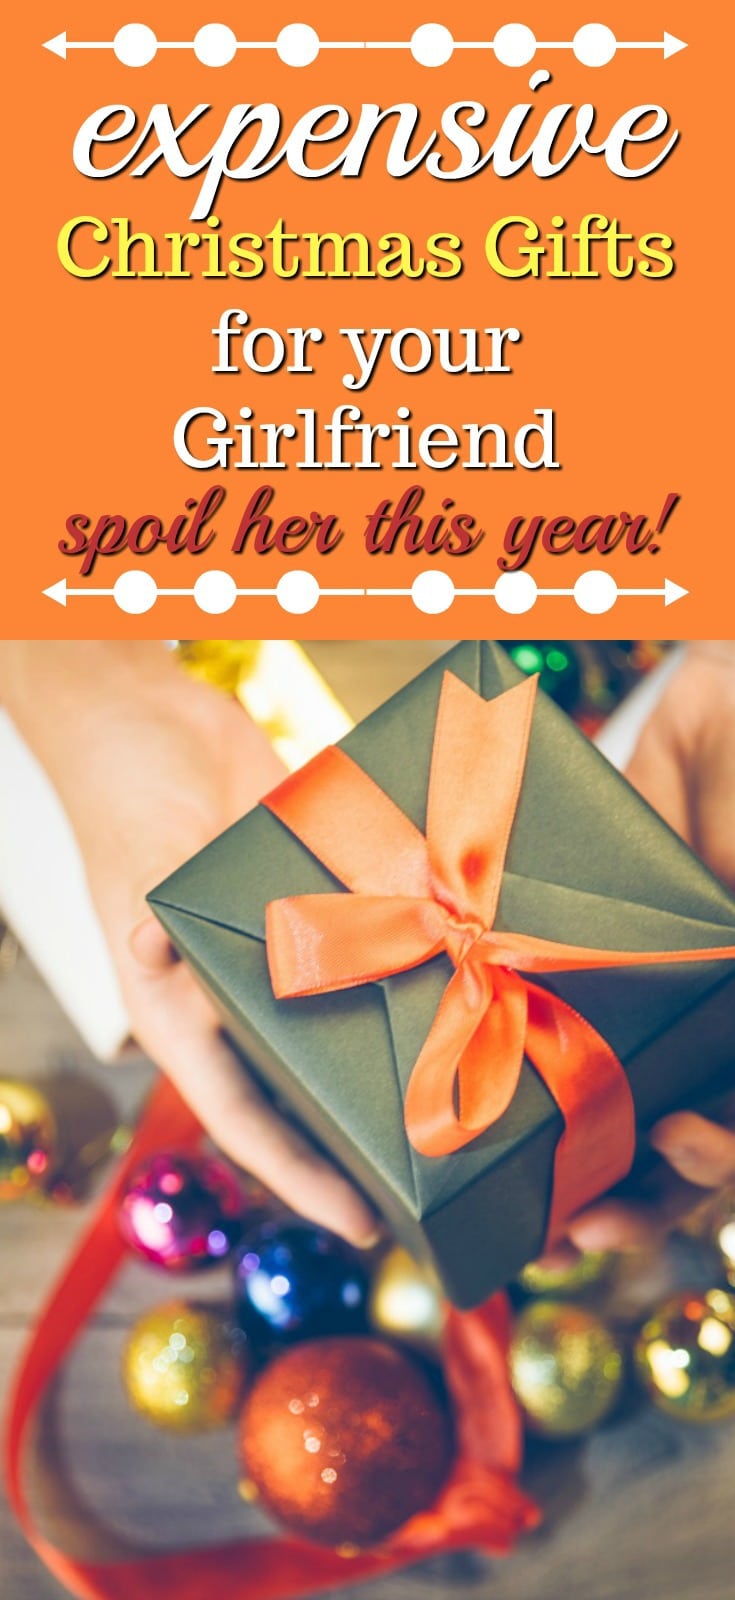 40 Expensive Christmas Gifts for Your Girlfriend Unique Gifter